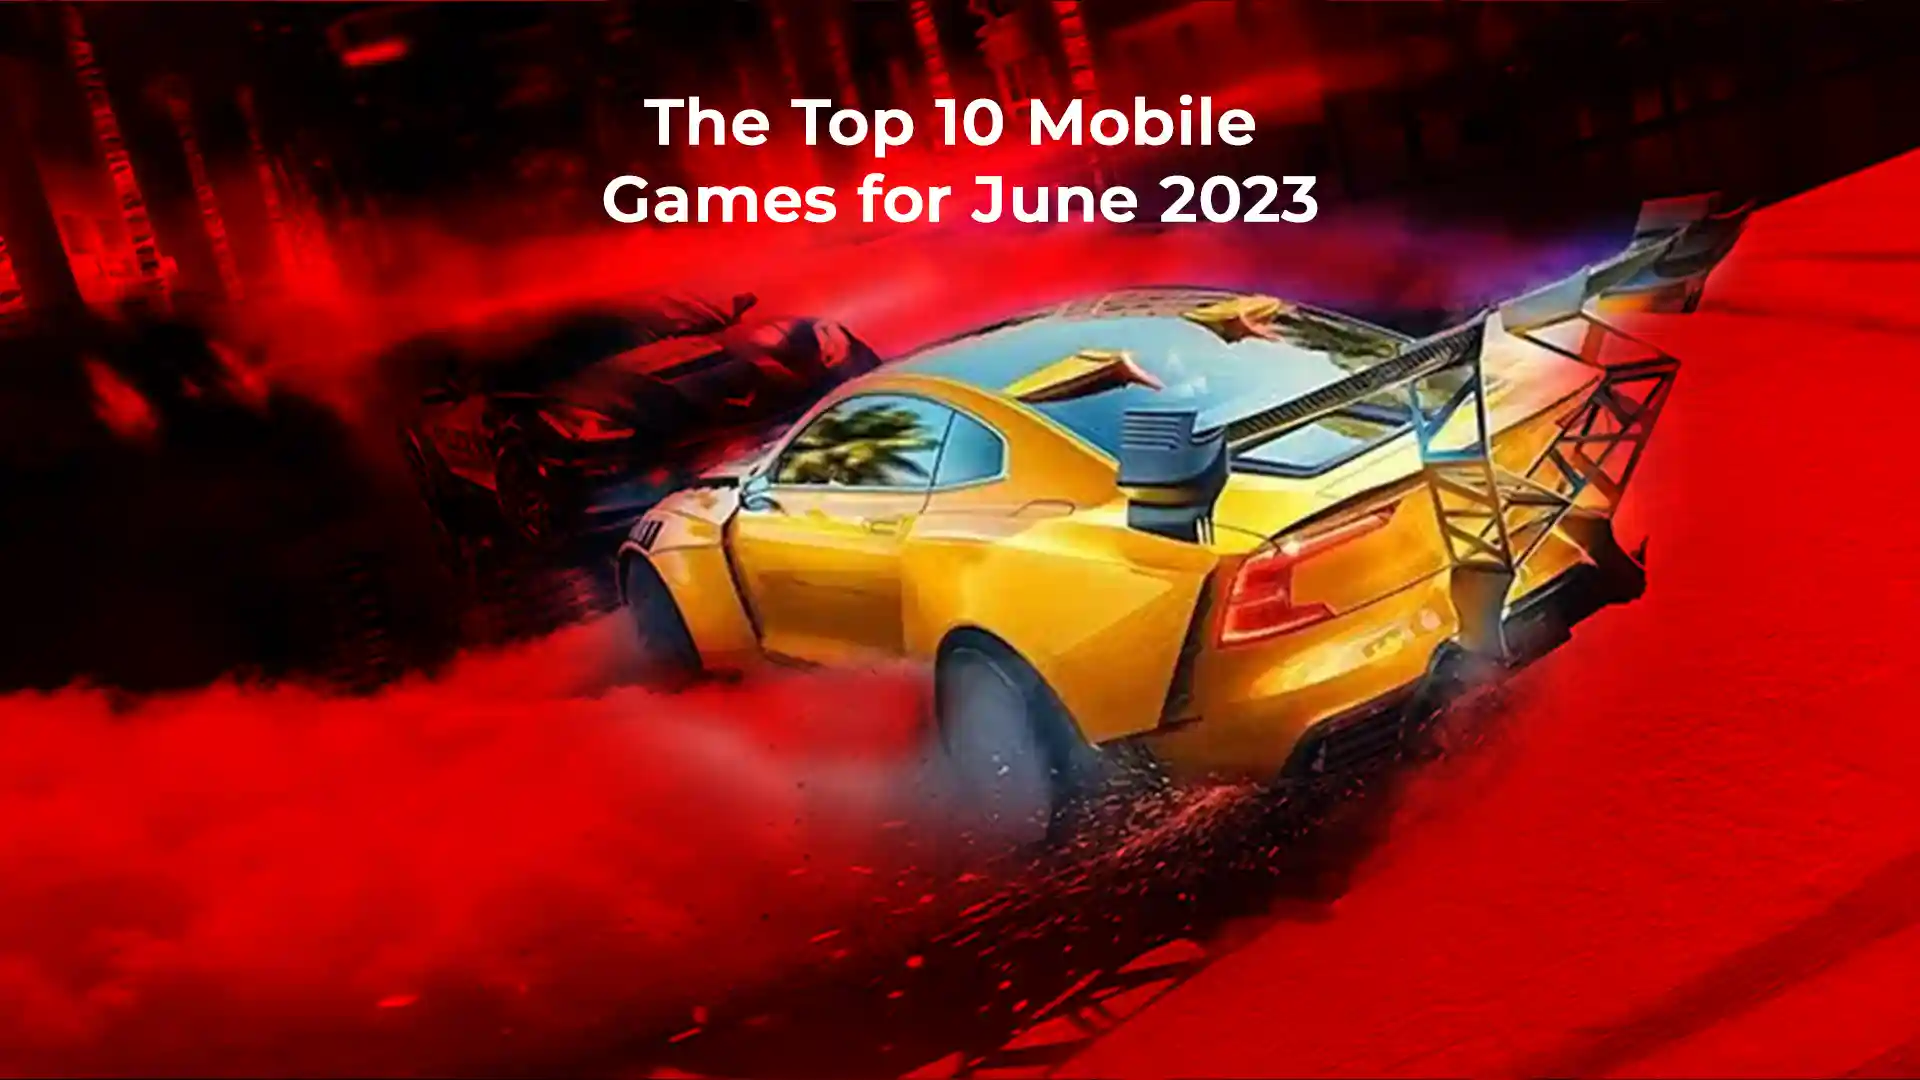 The Top 10 Mobile Games for June 2023